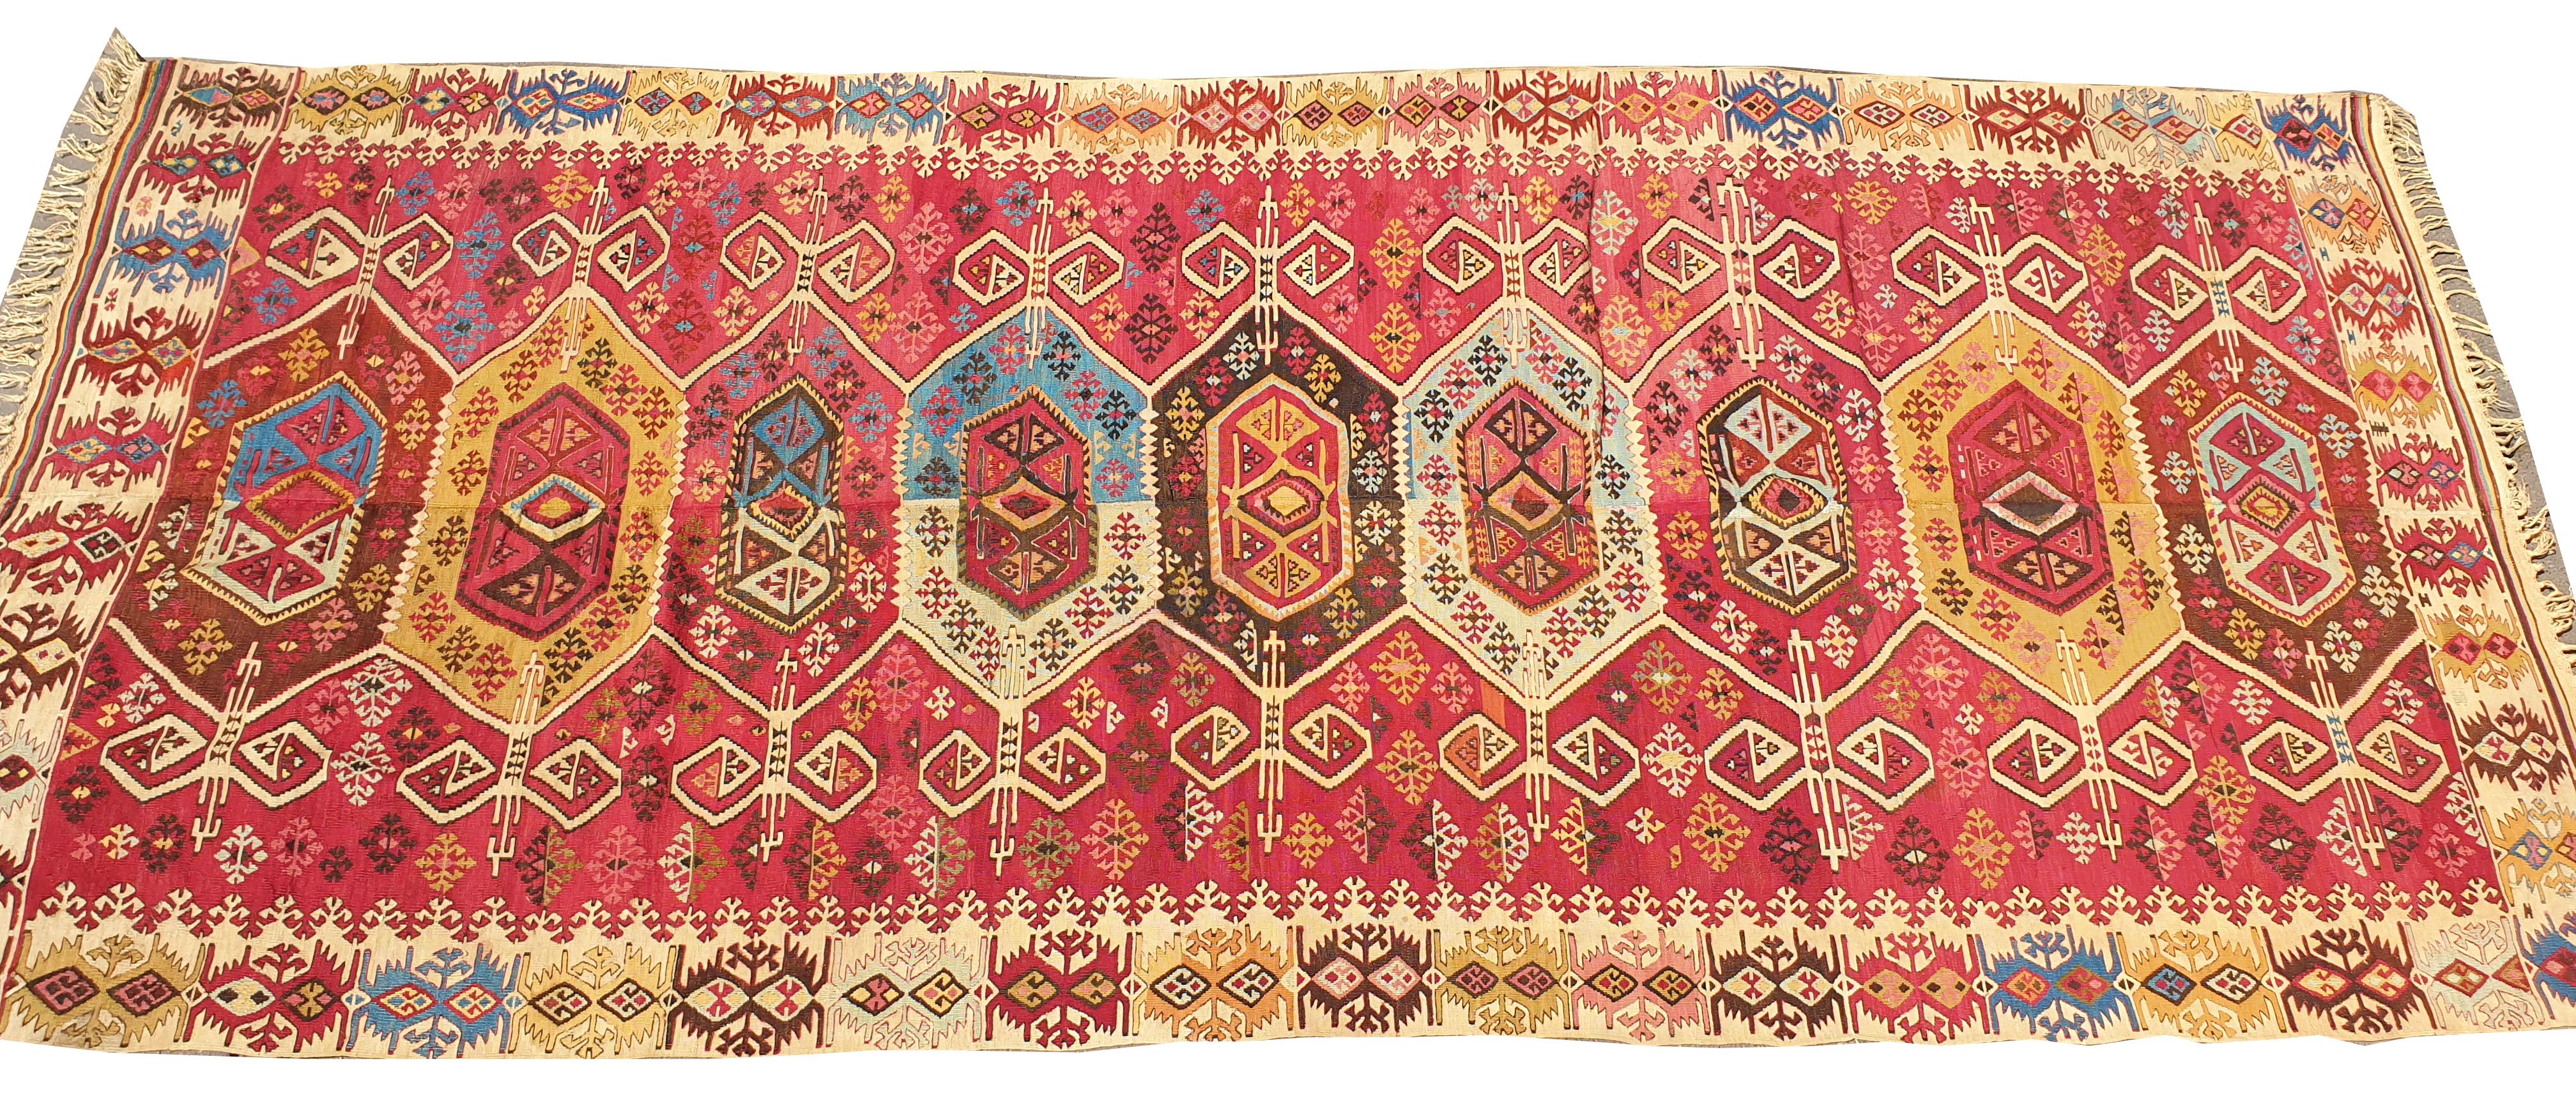 757 - Lovely mid-century Turkish flat rug or Kilim, with geometric design and pretty colors with red, pink, orange, yellow, blue and gray, completely hand-woven with wool on wool.